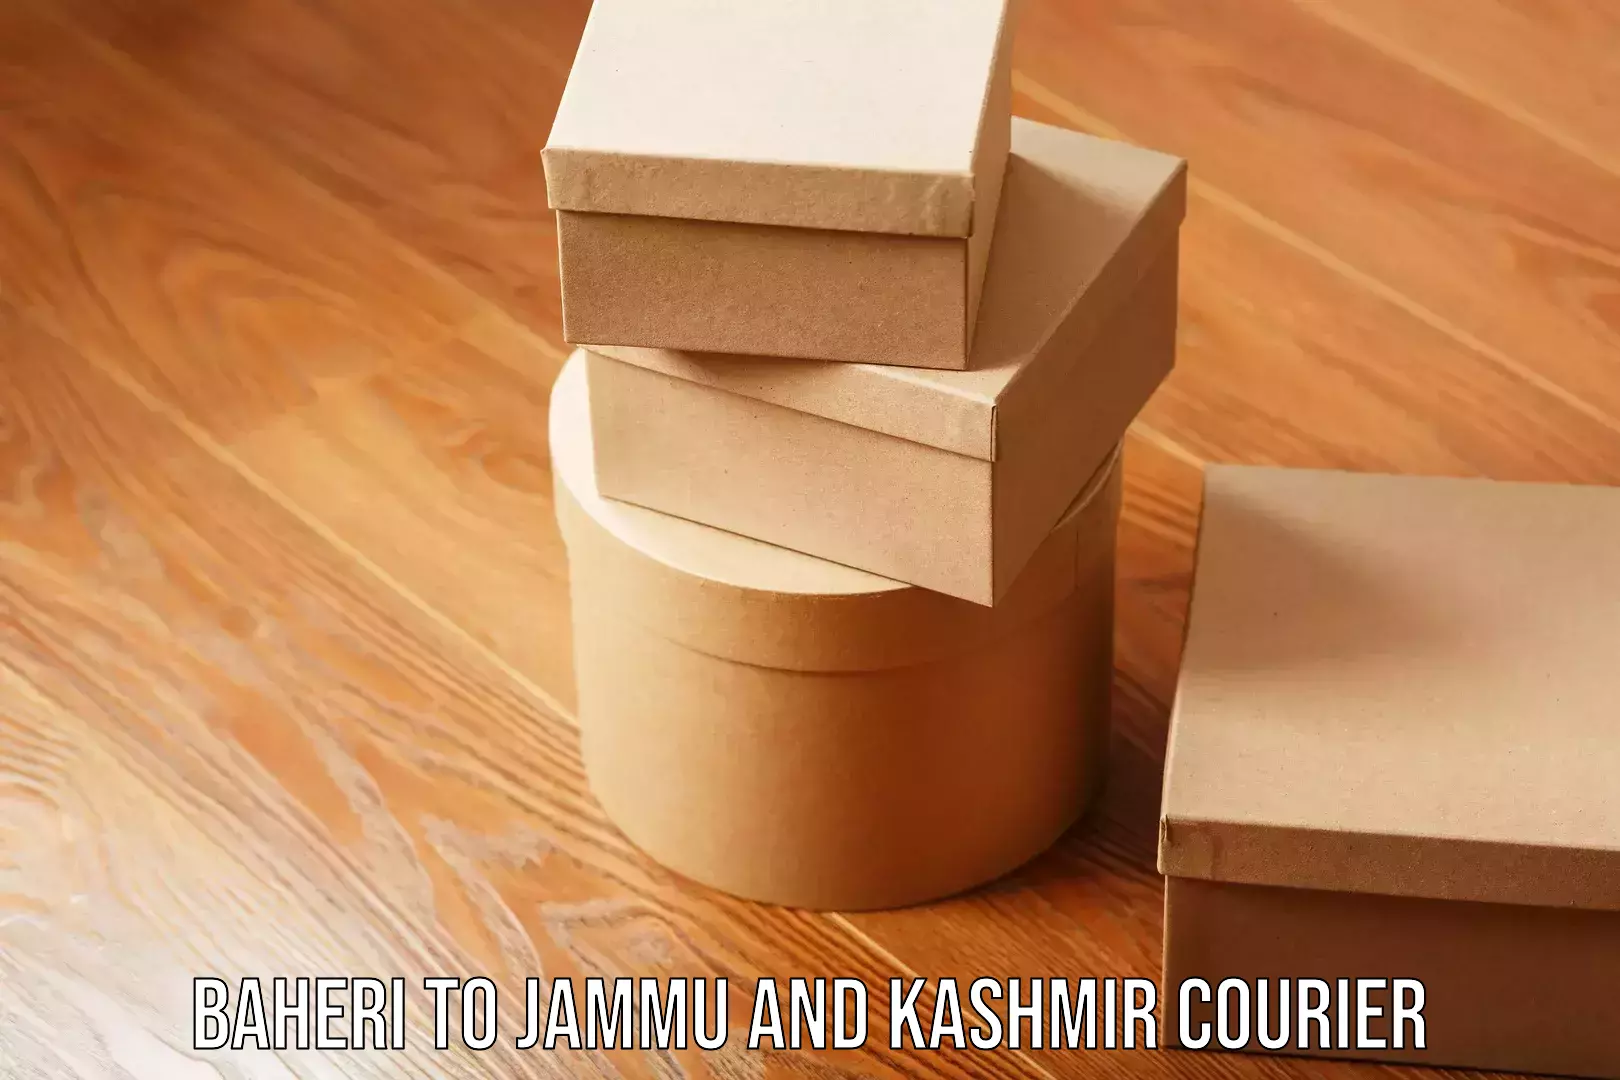 Return courier service in Baheri to Jammu and Kashmir